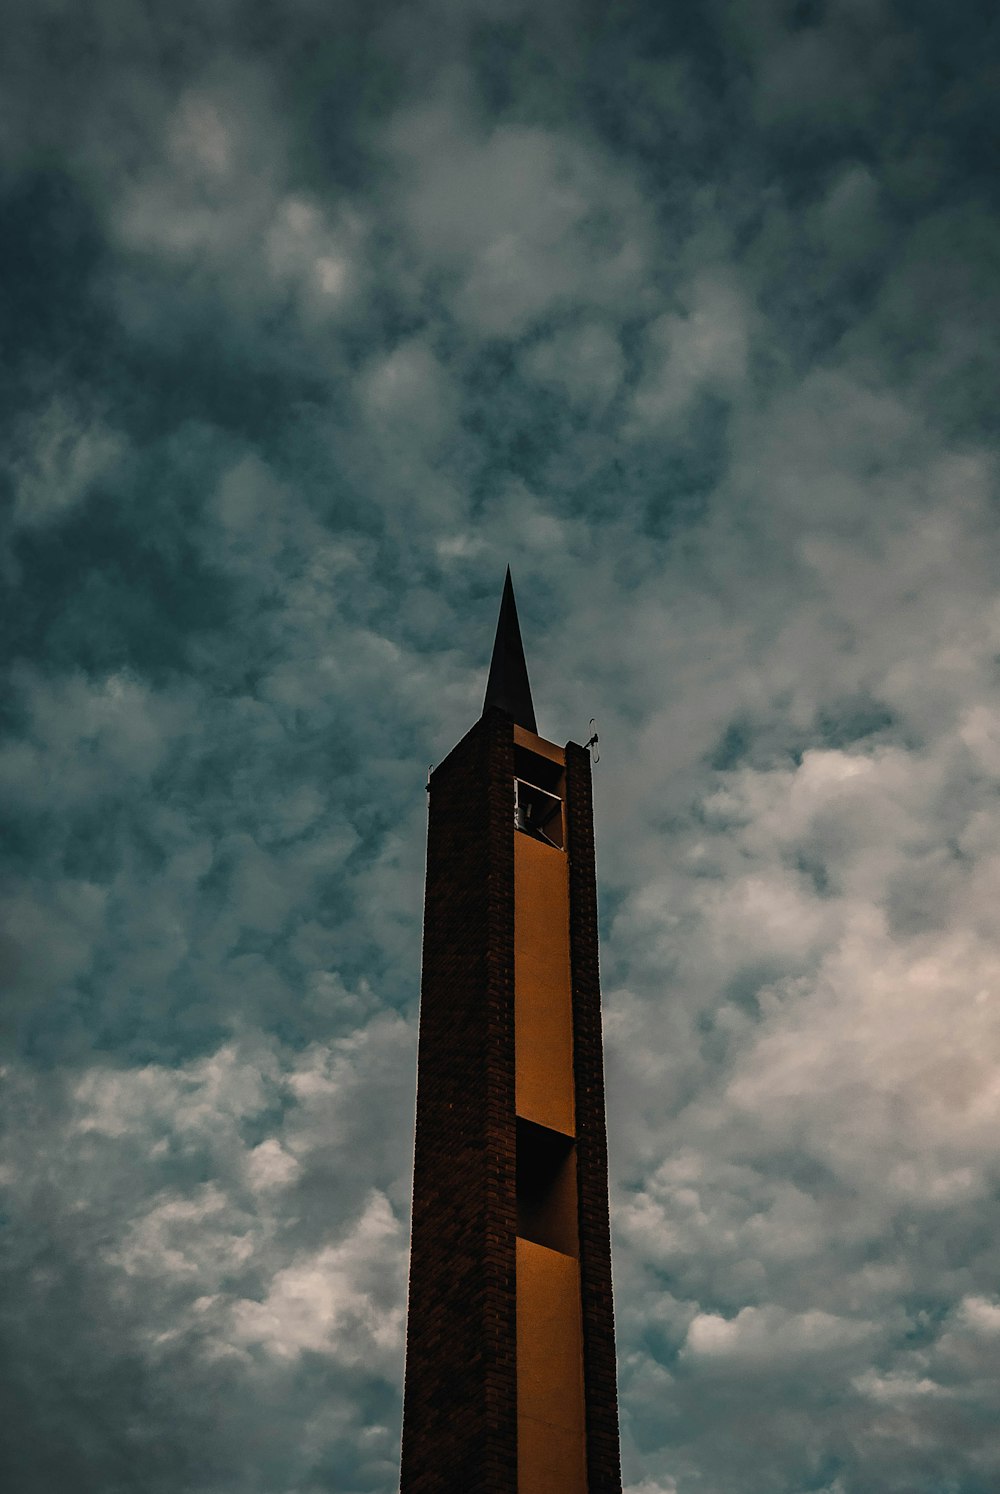 brown concrete tower under cloudy sky during daytime